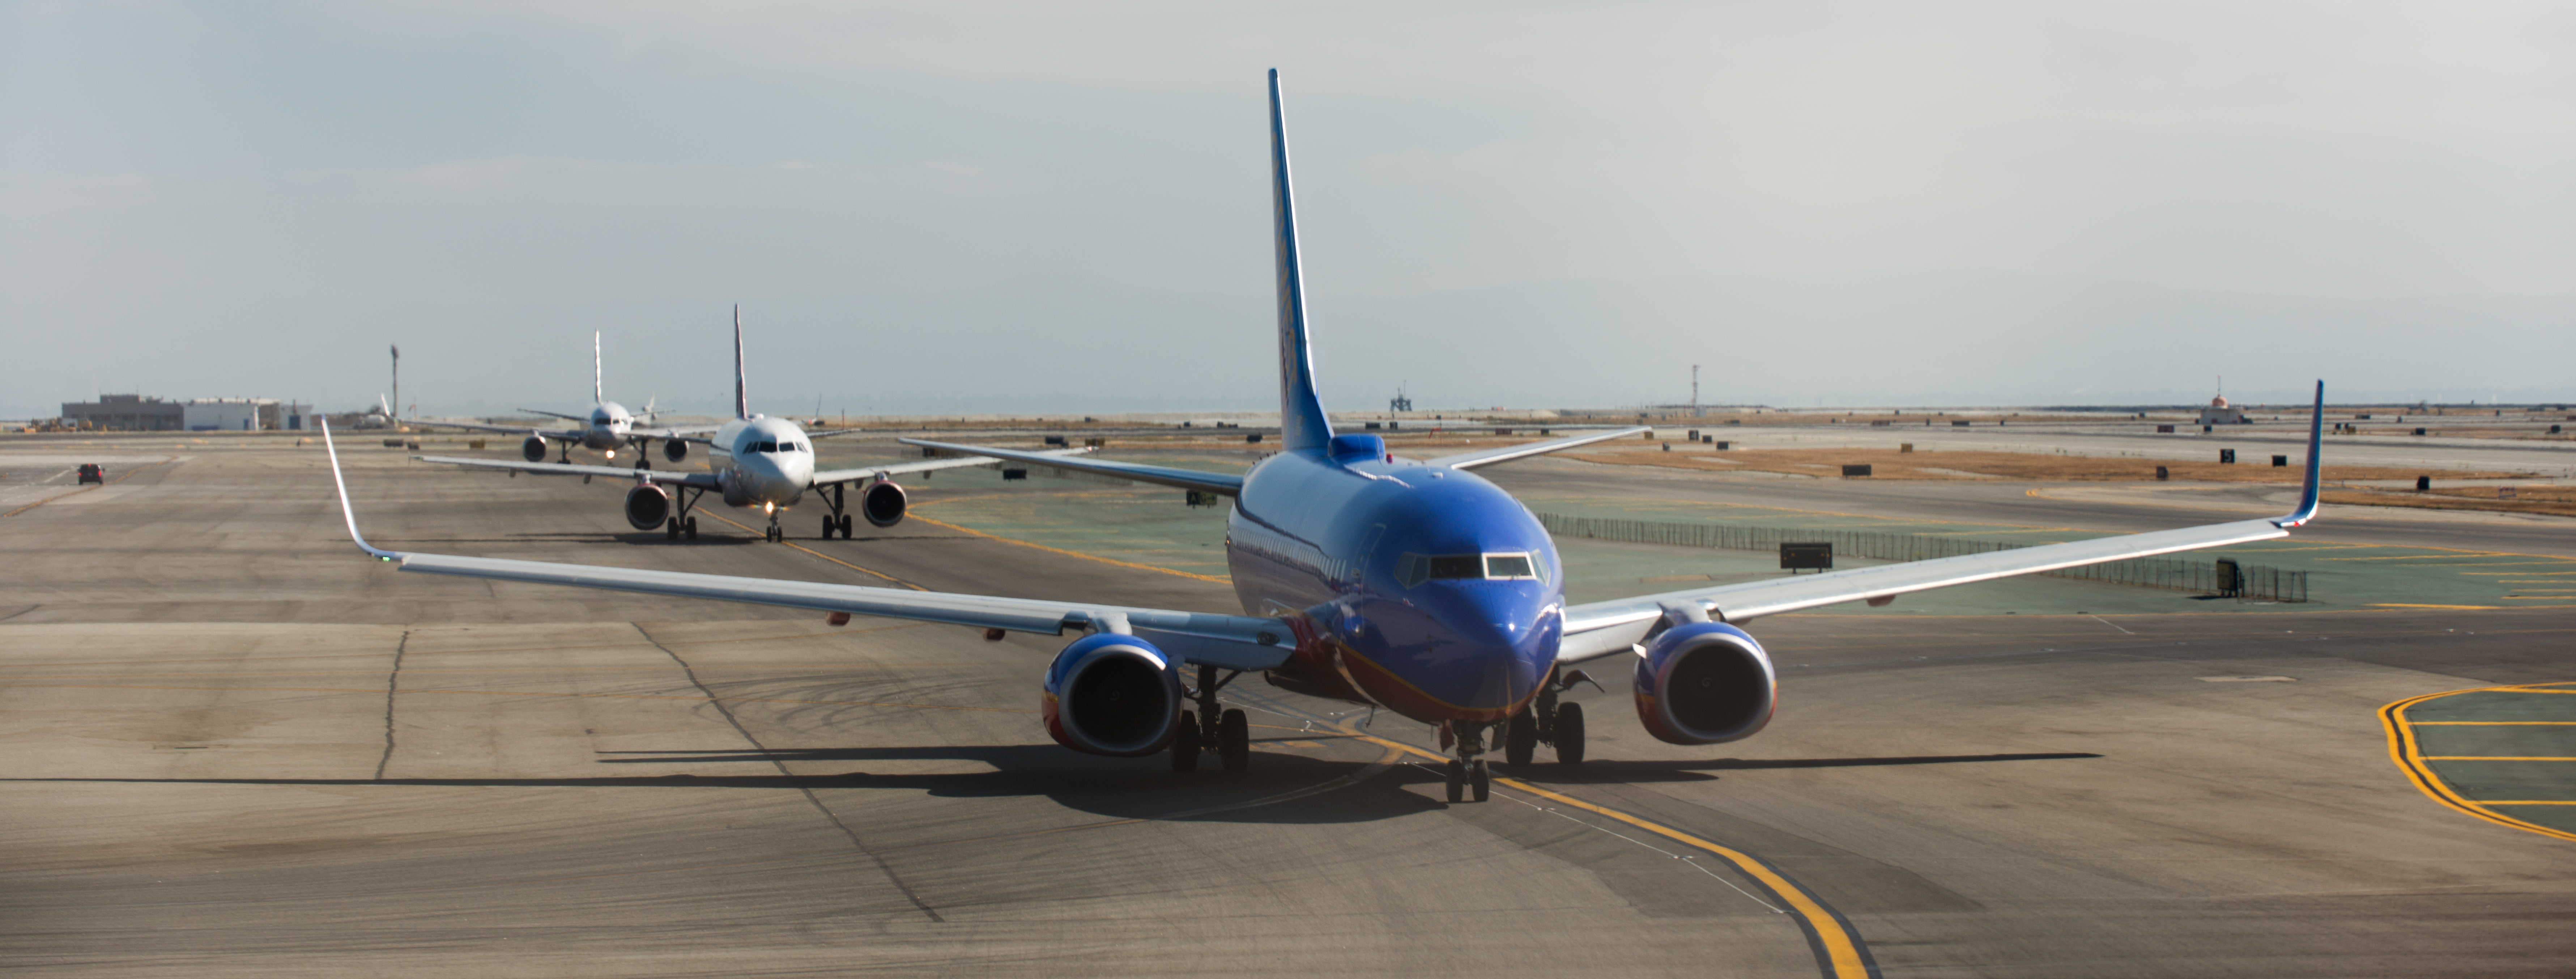 Three planes waiting in line for takeoff at SFO, Aircraft, Airplane, Outdoor, Vehicle, HQ Photo